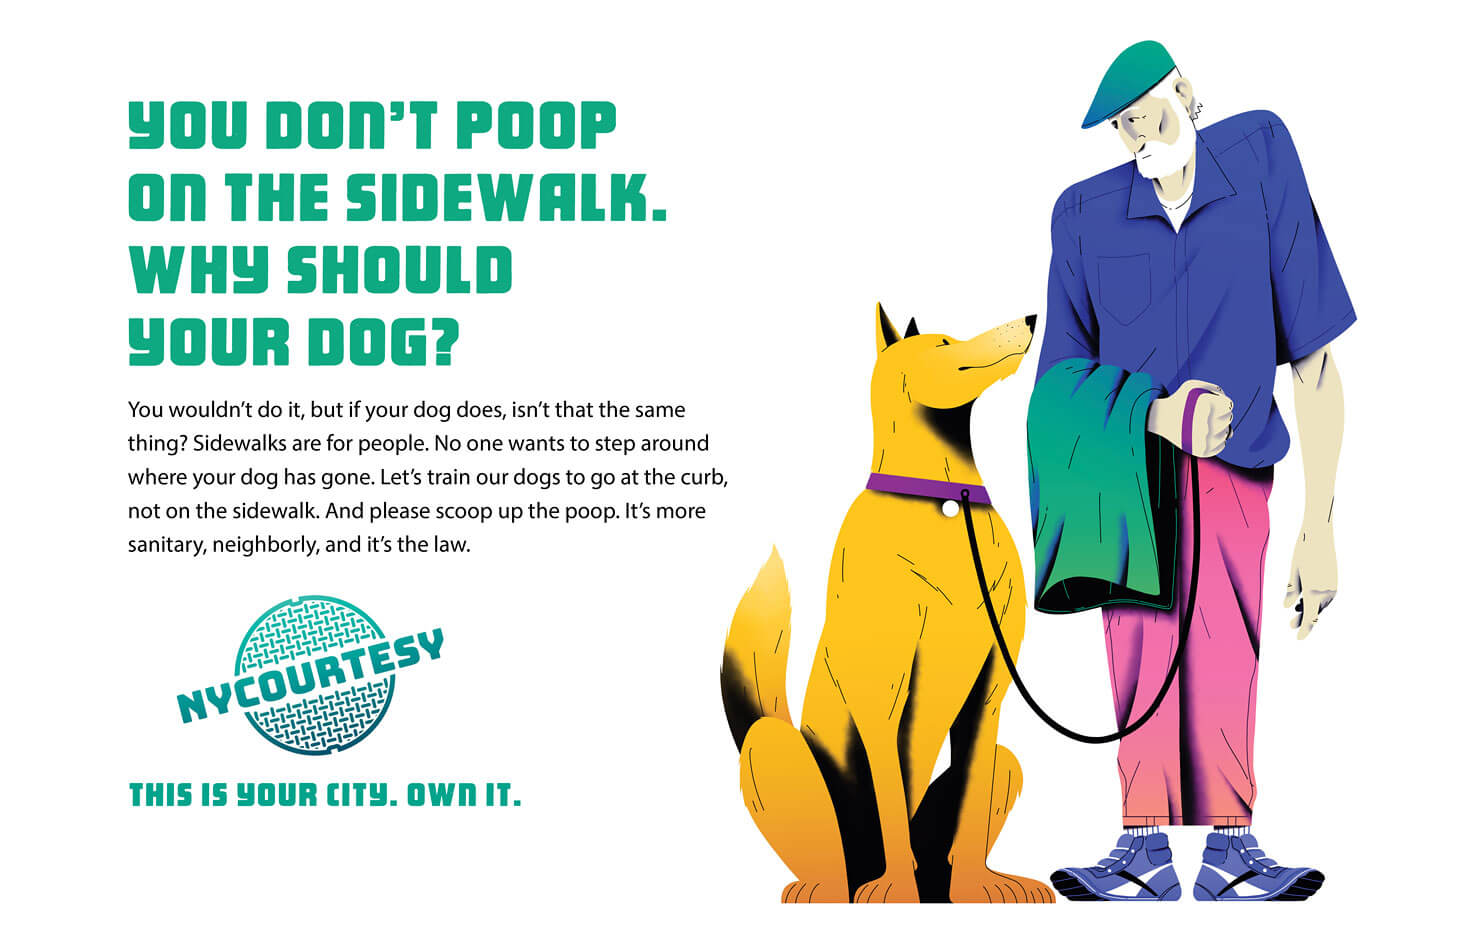 New York Courtesy. You don't poop on the sidewalk. Why should your dog?